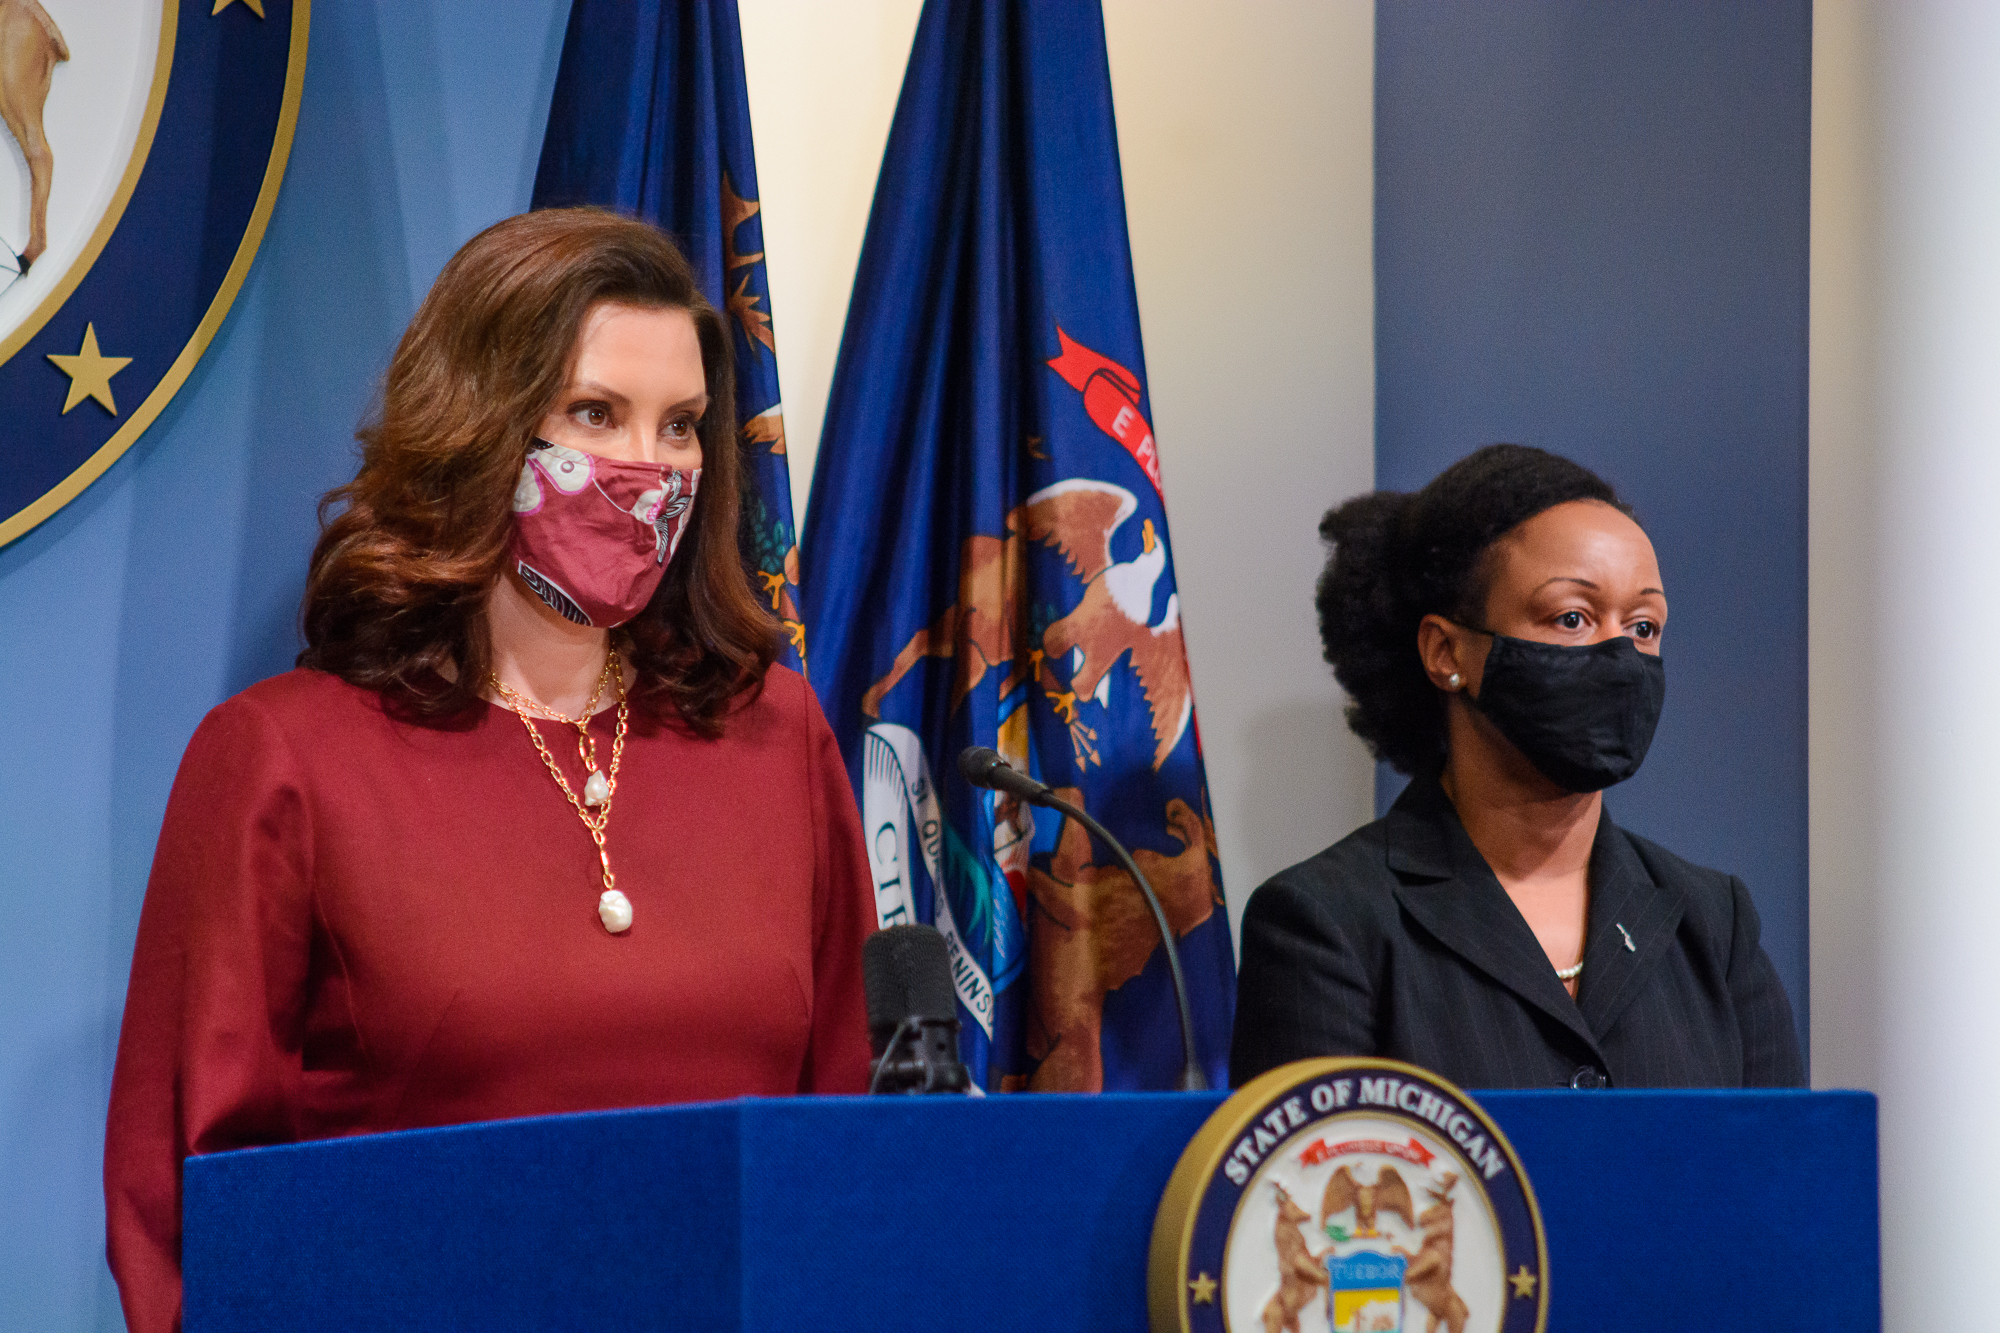 Whitmer Speaking in a mask // 2022 Michigan budget photo // GOV. WHITMER DURING A COVID-19 UPDATE. PHOTO OFFICE OF THE GOVERNOR